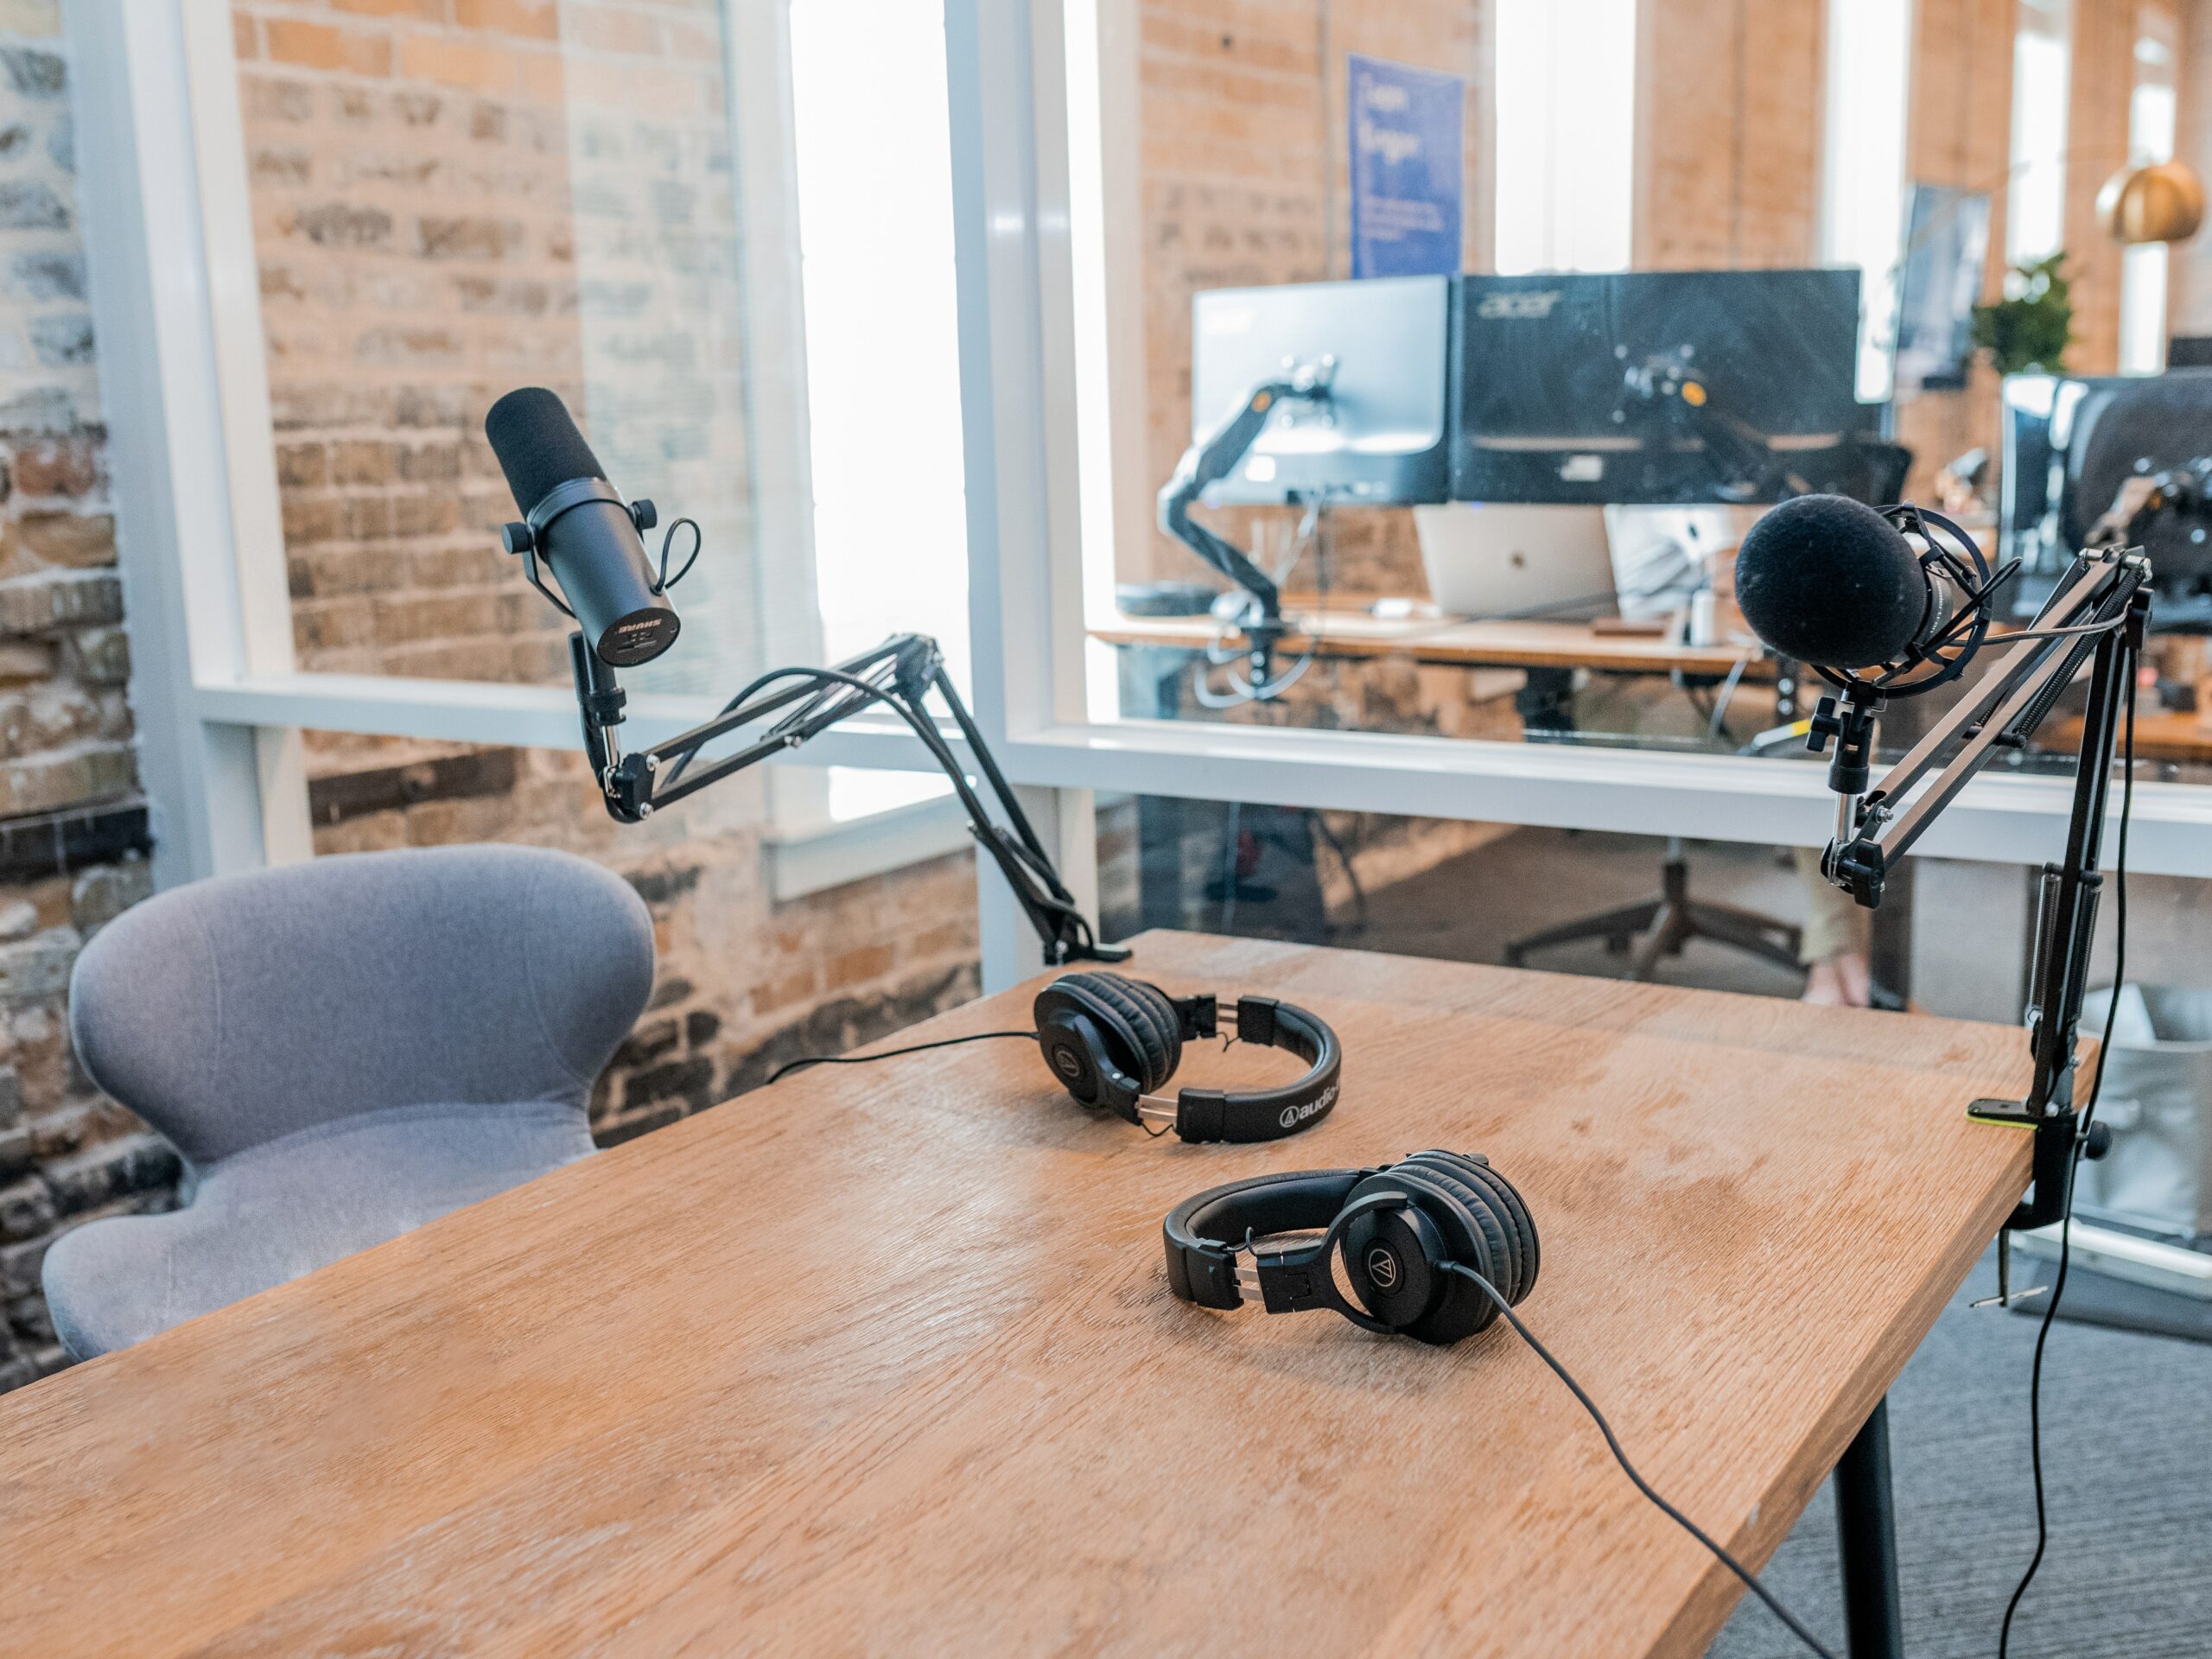 This is a photo of a podcast studio. There is recording equipment, microphones, and laptops set up around a table in a small room.